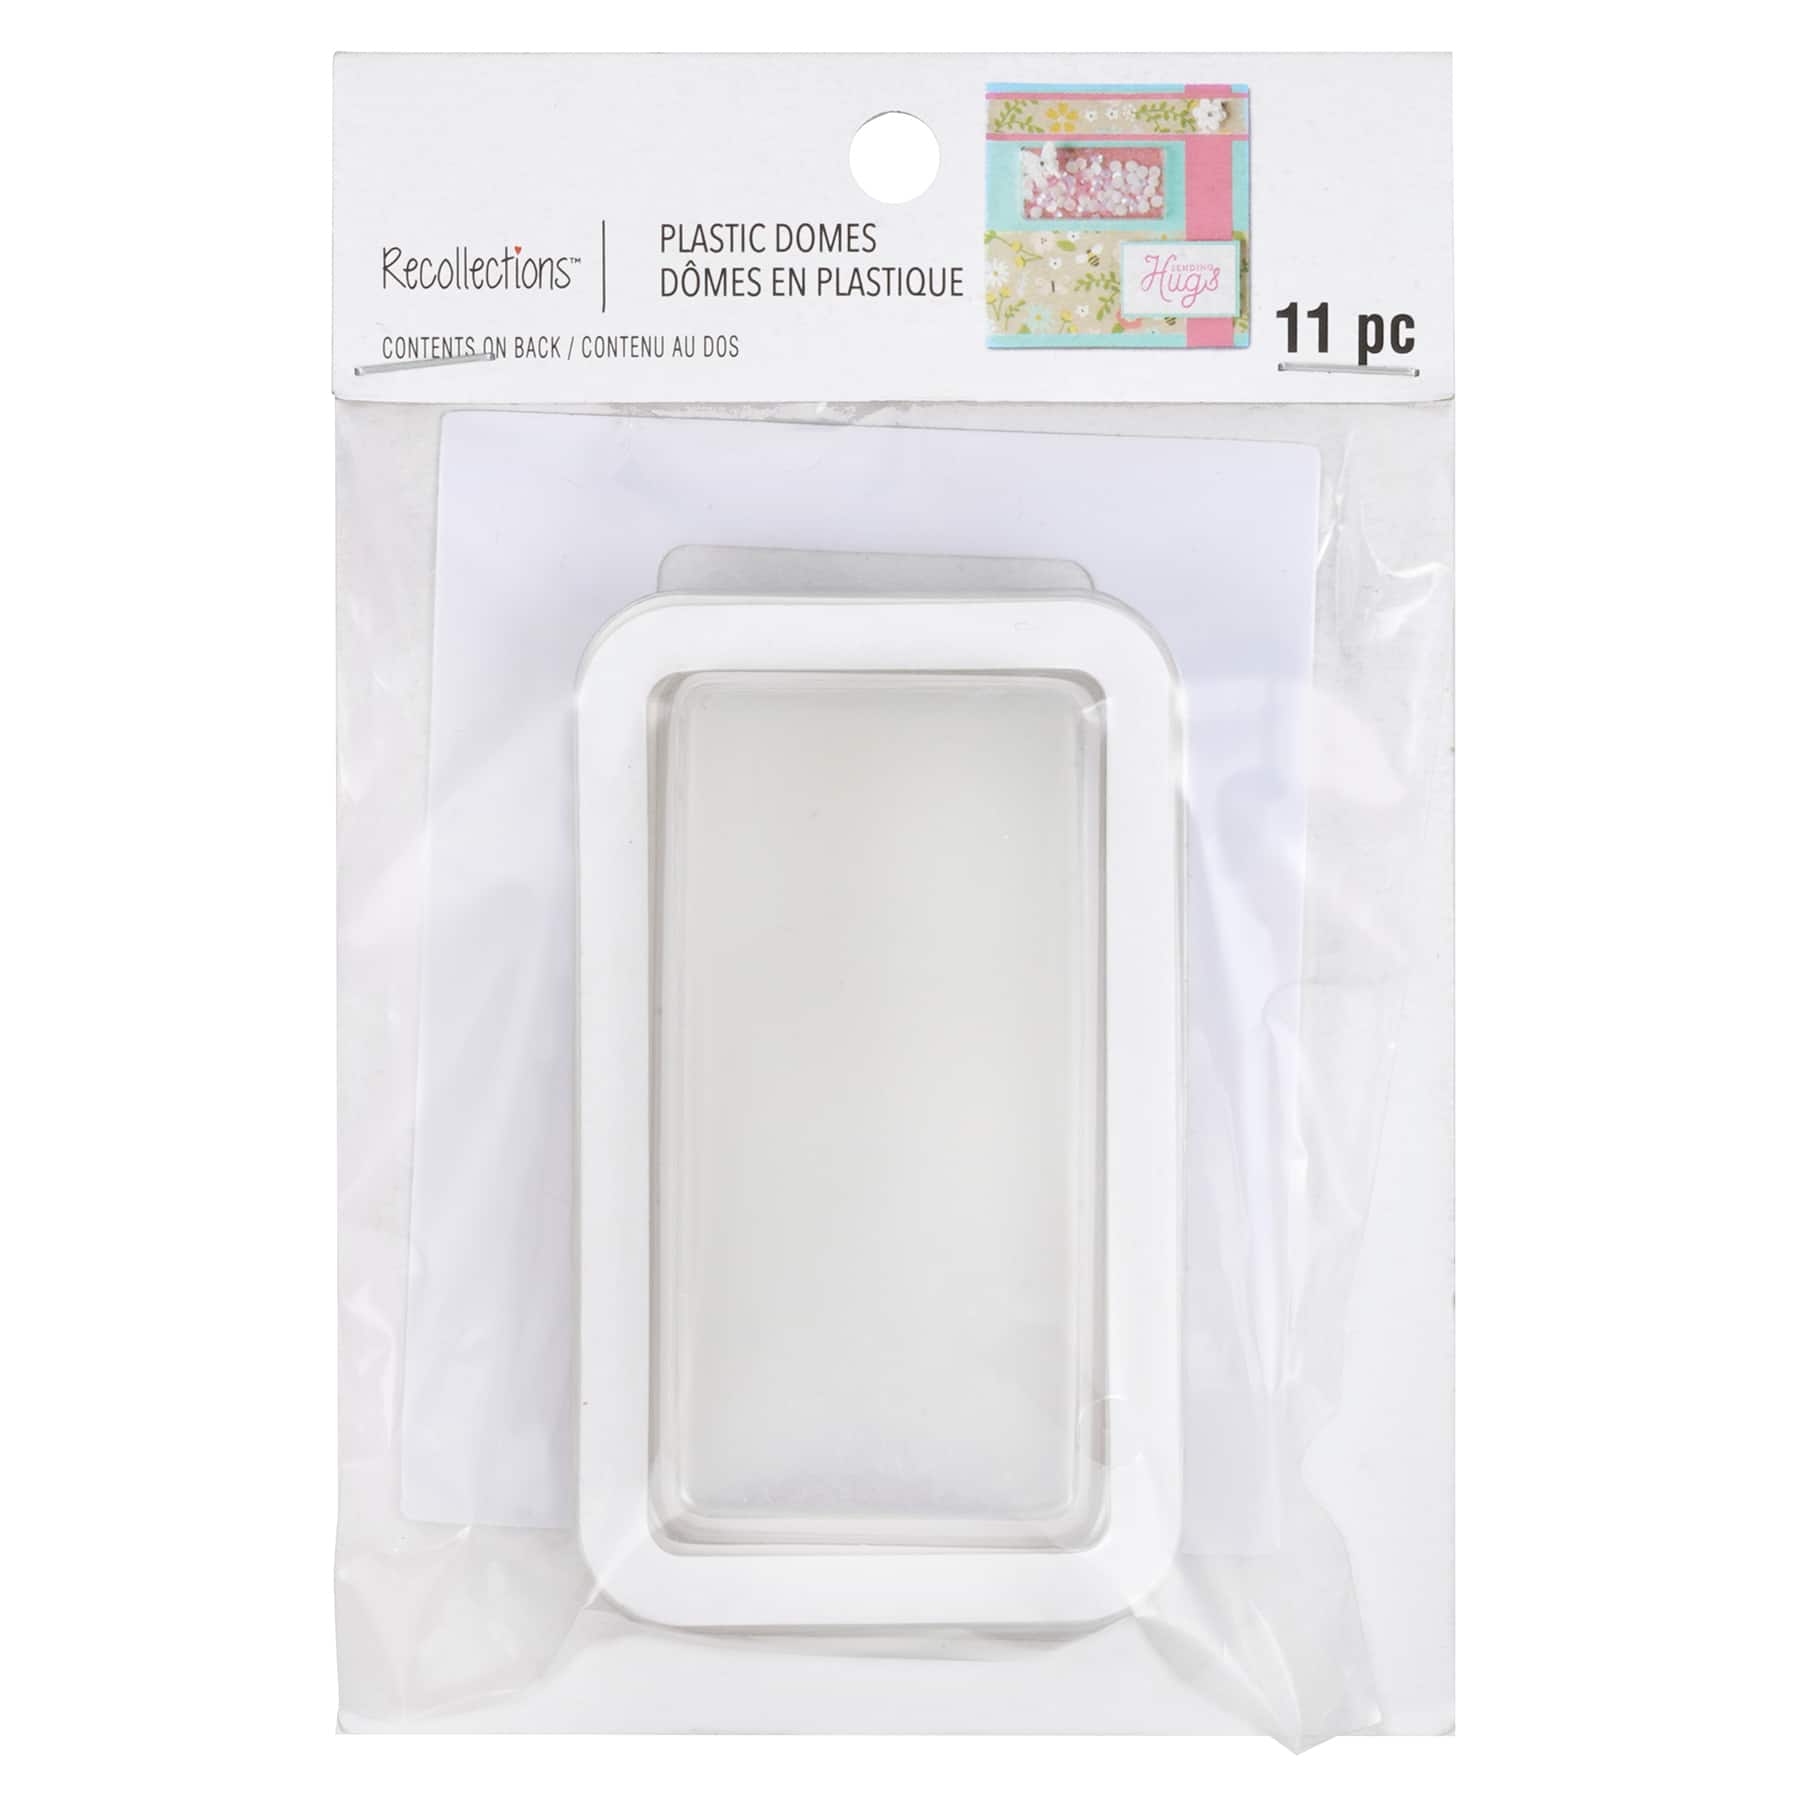 Sizzix Making Essentials Shaker Domes Rounded Square